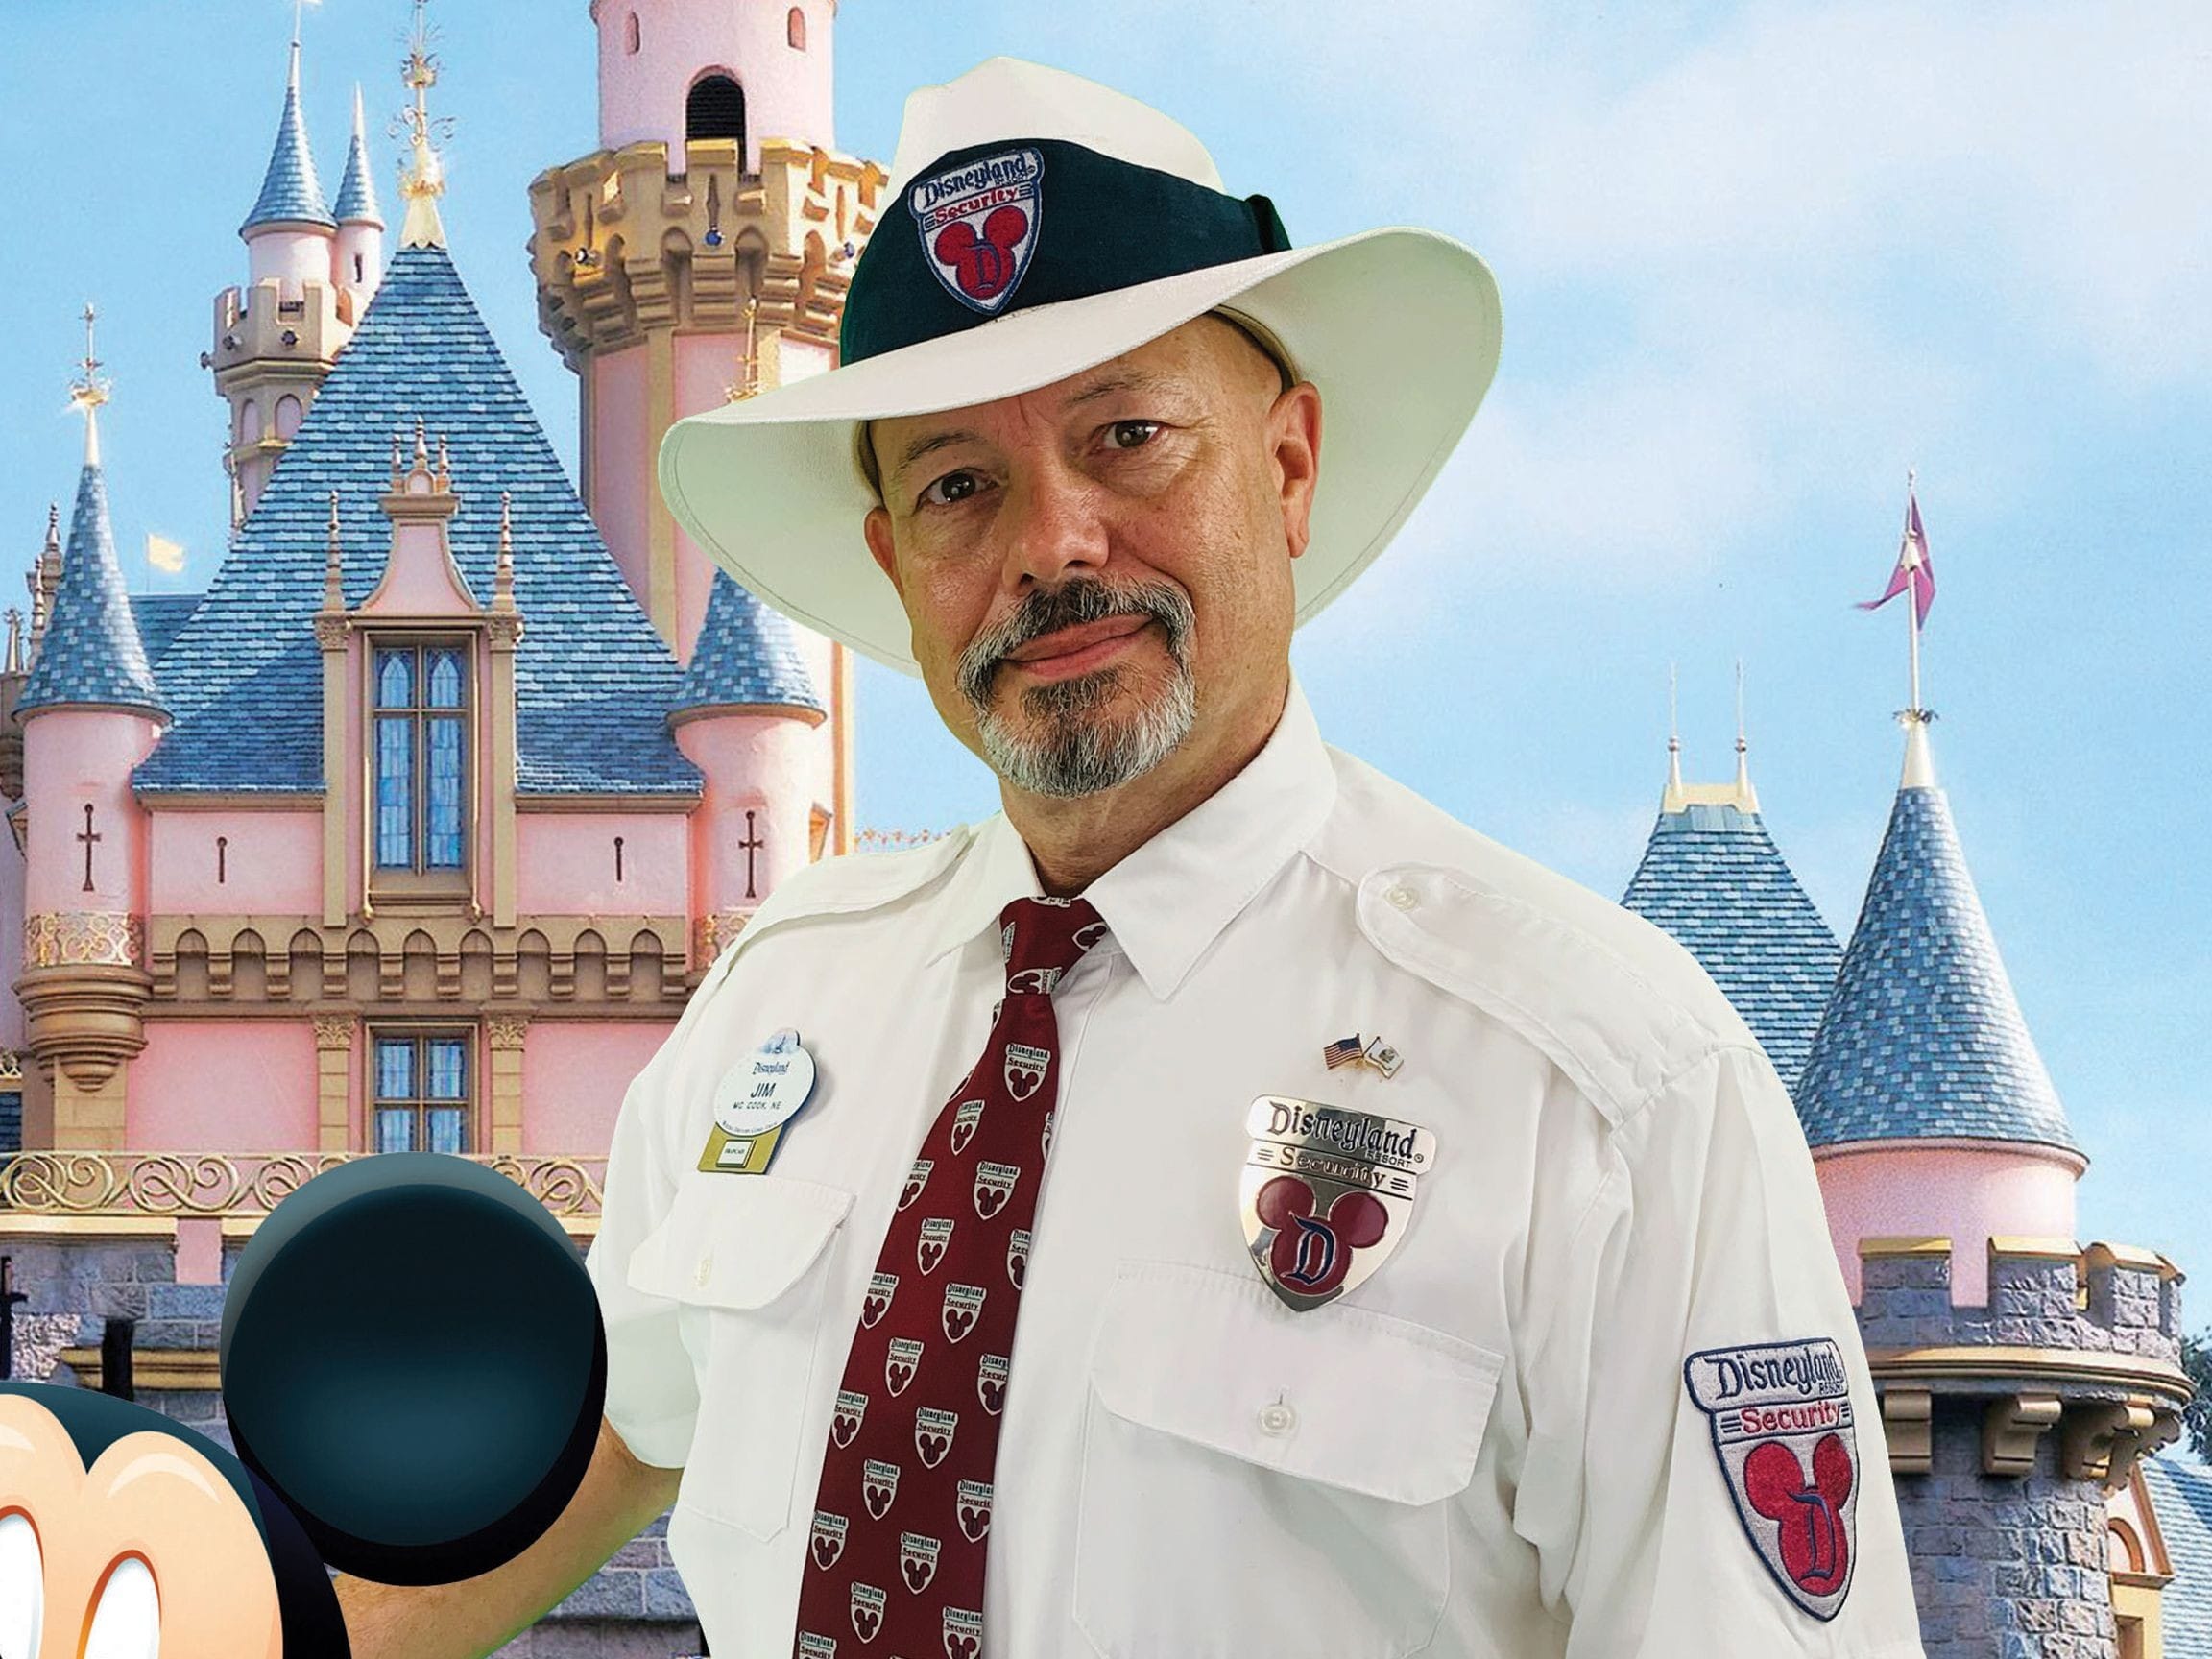 Jim worked twice for the Disneyland Resort Security & Emergency Services keeping guests safe by working various security duties.